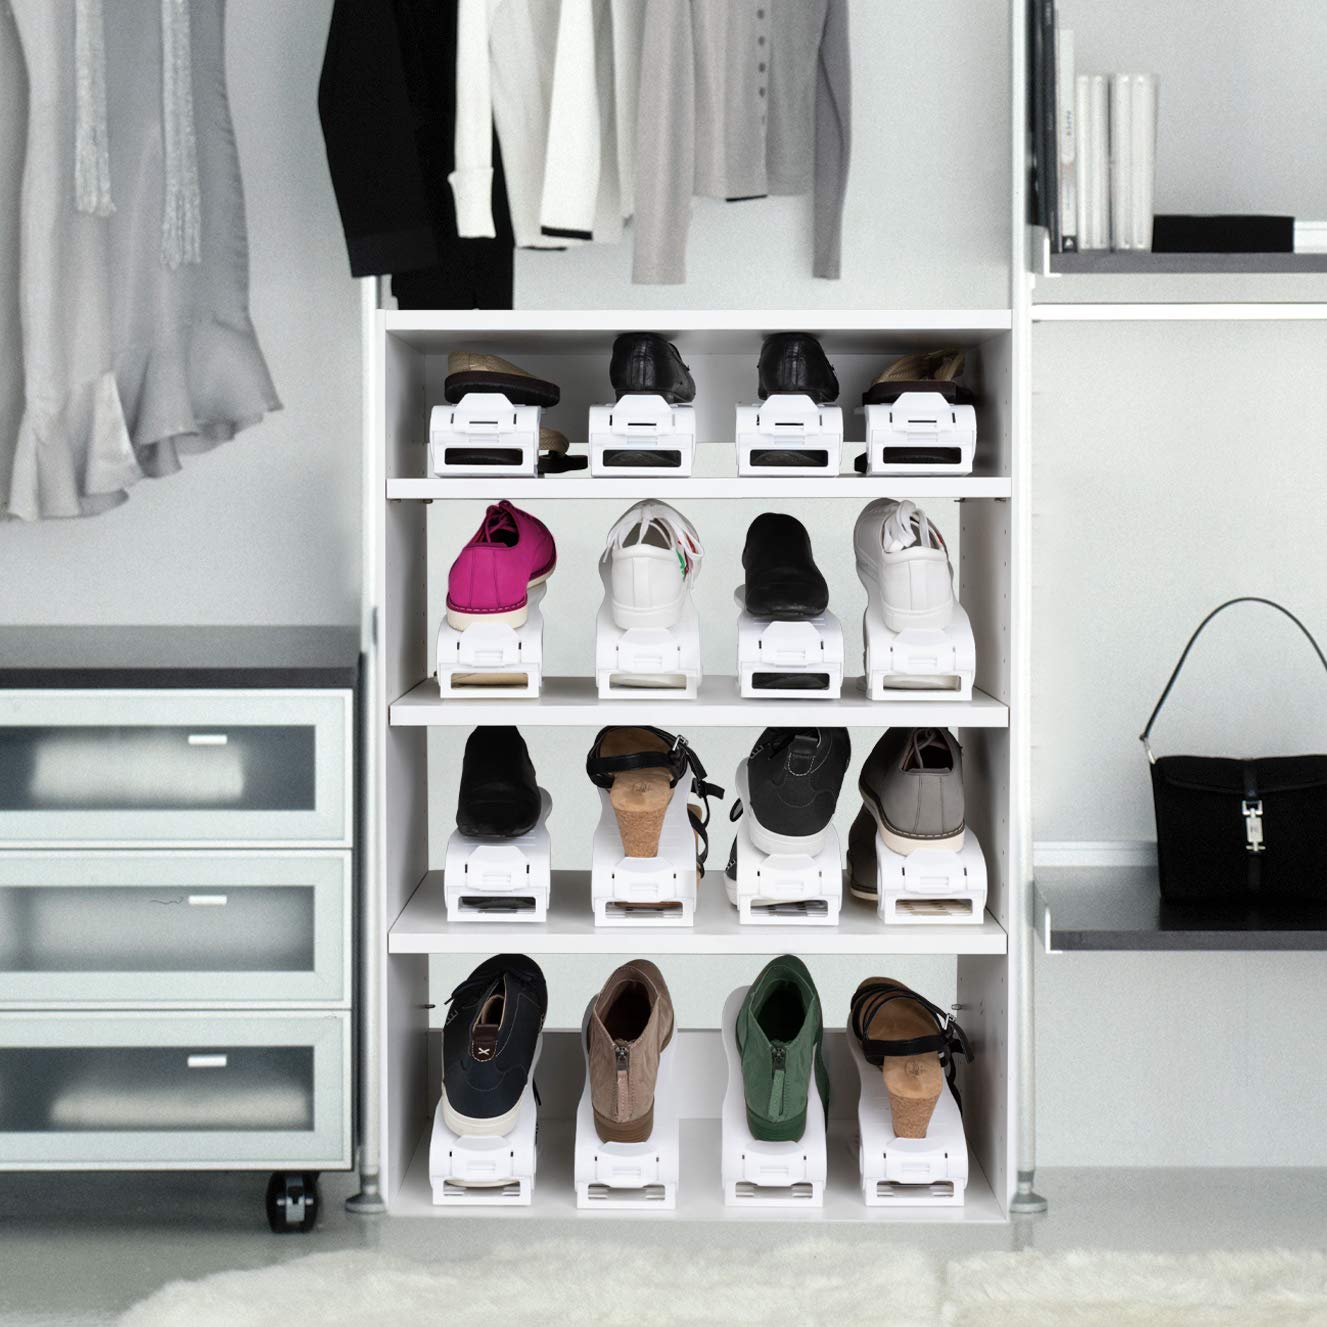 Adjustable Shoe Rack Household Organizer Storage Shoes Save Space